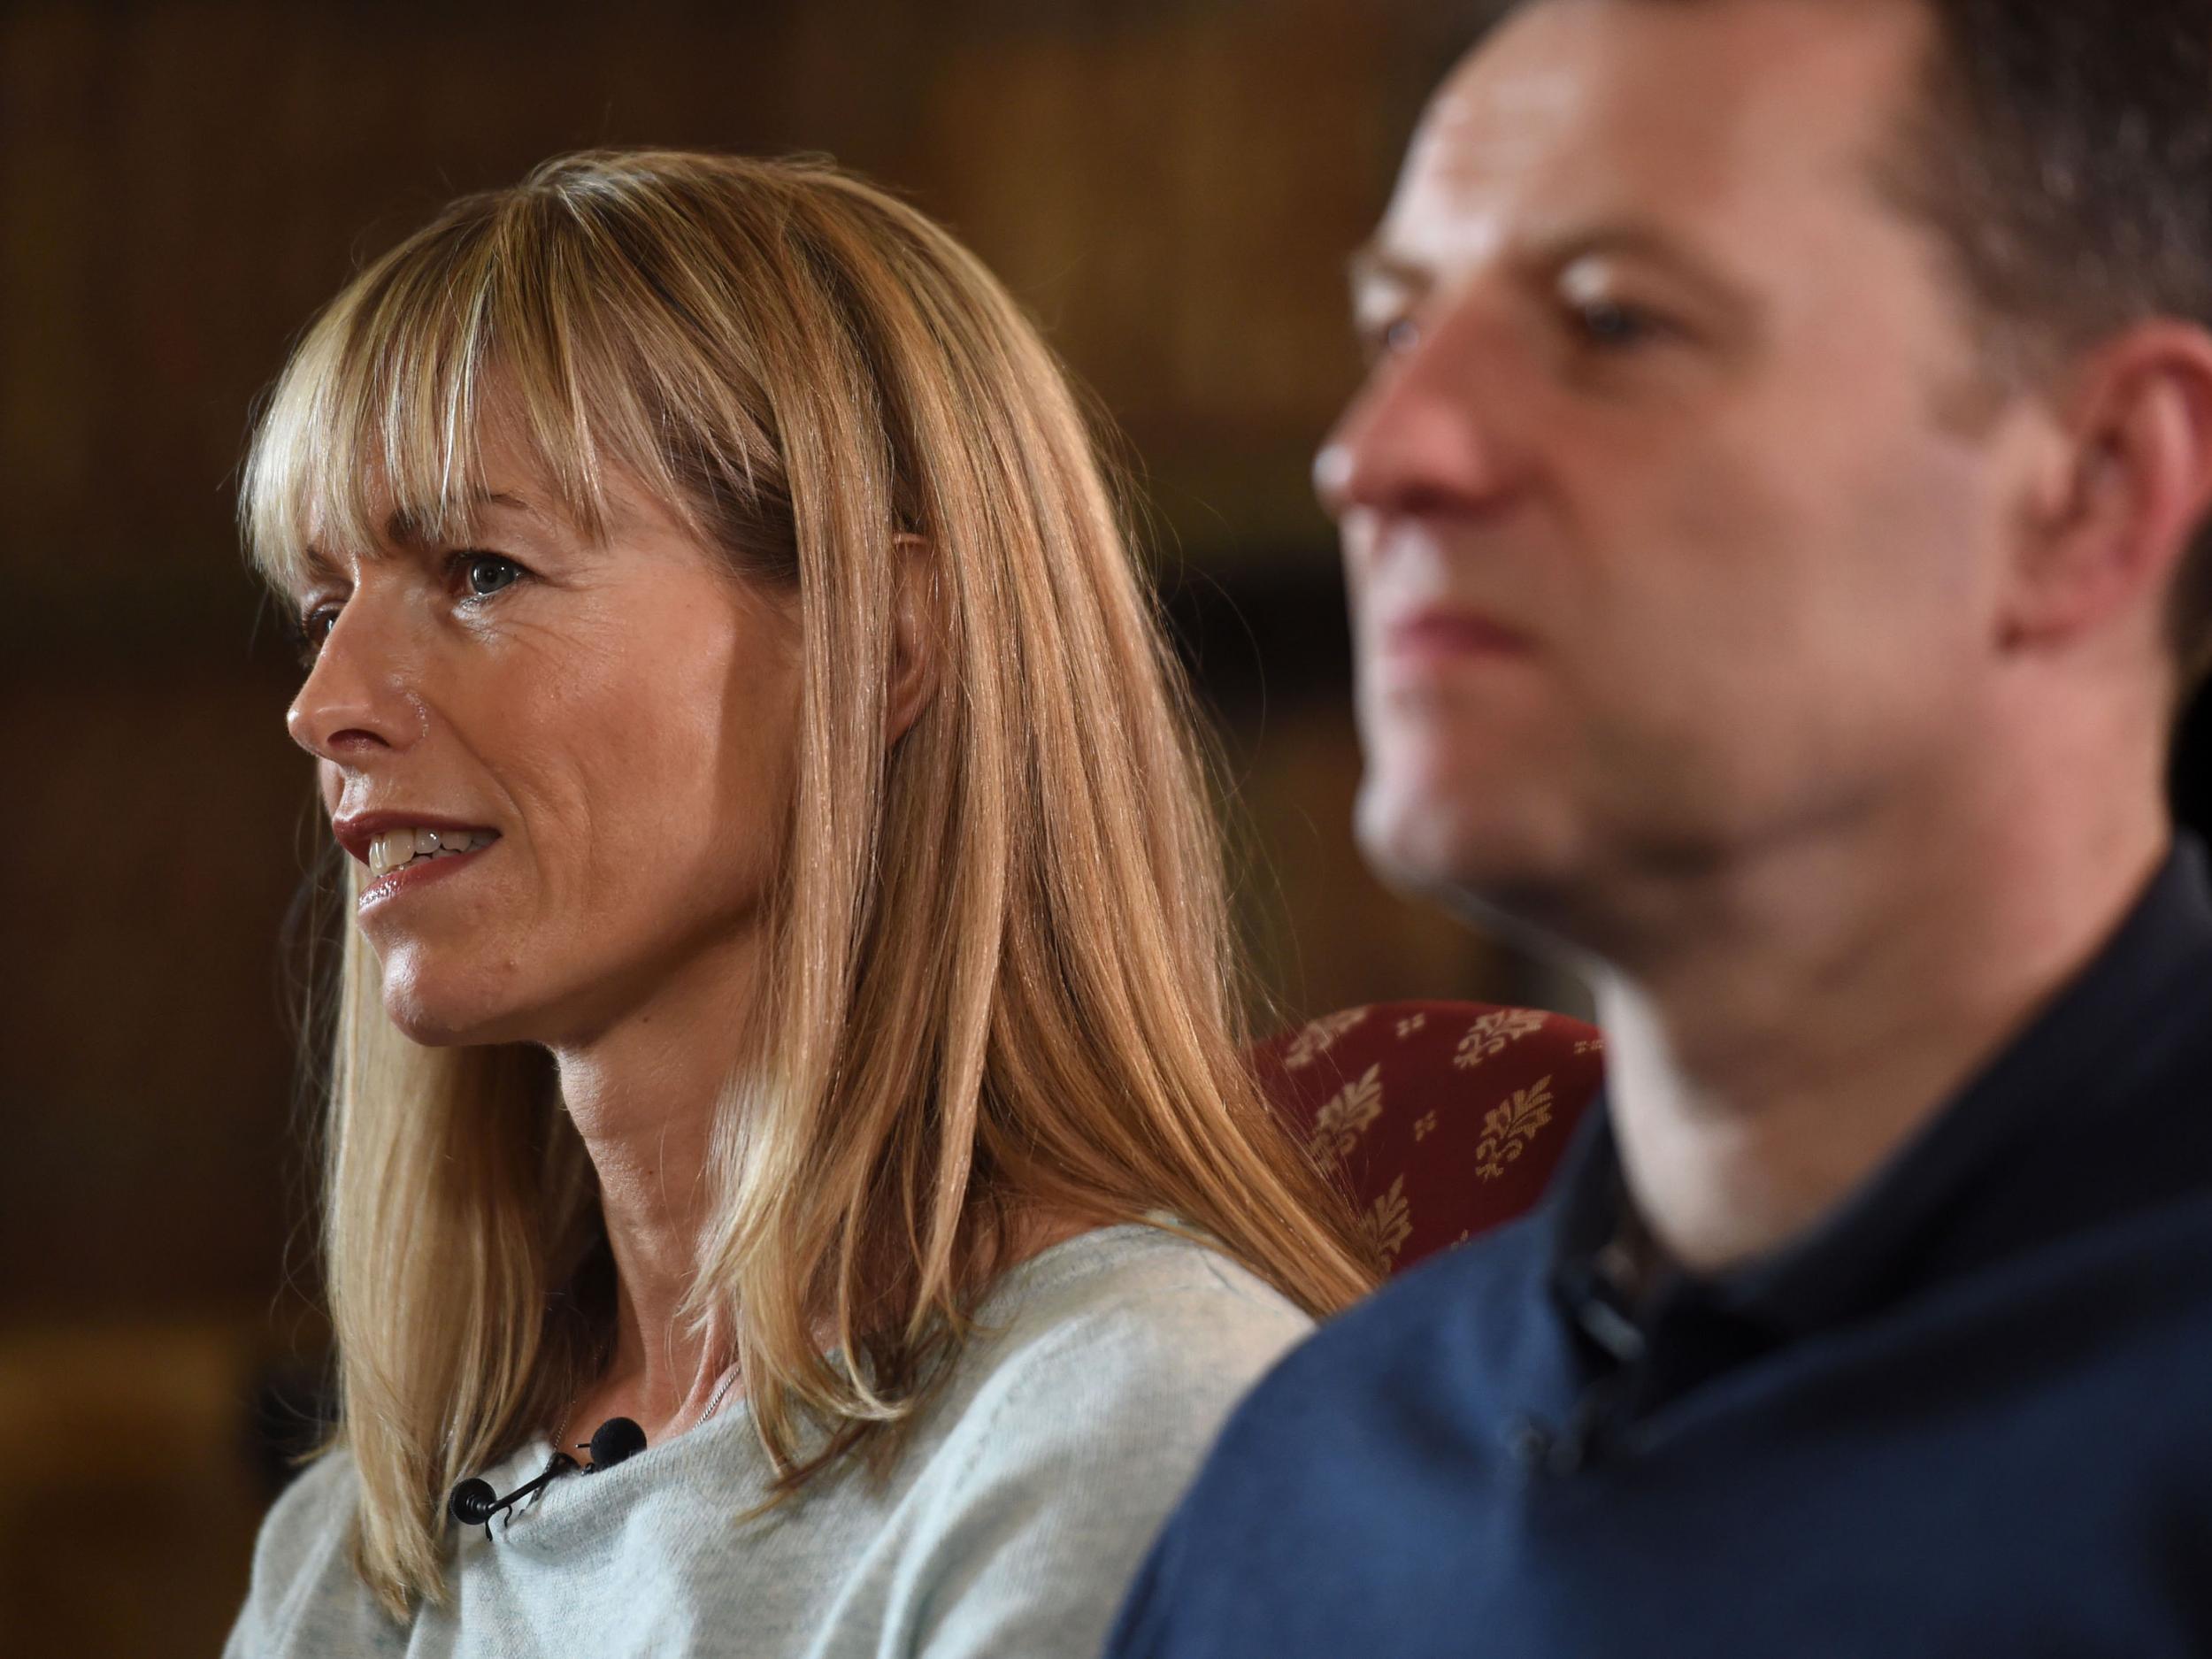 ‘We did not see – and still do not see – how this programme will help the search for Madeleine,’ said Kate and Gerry McCann